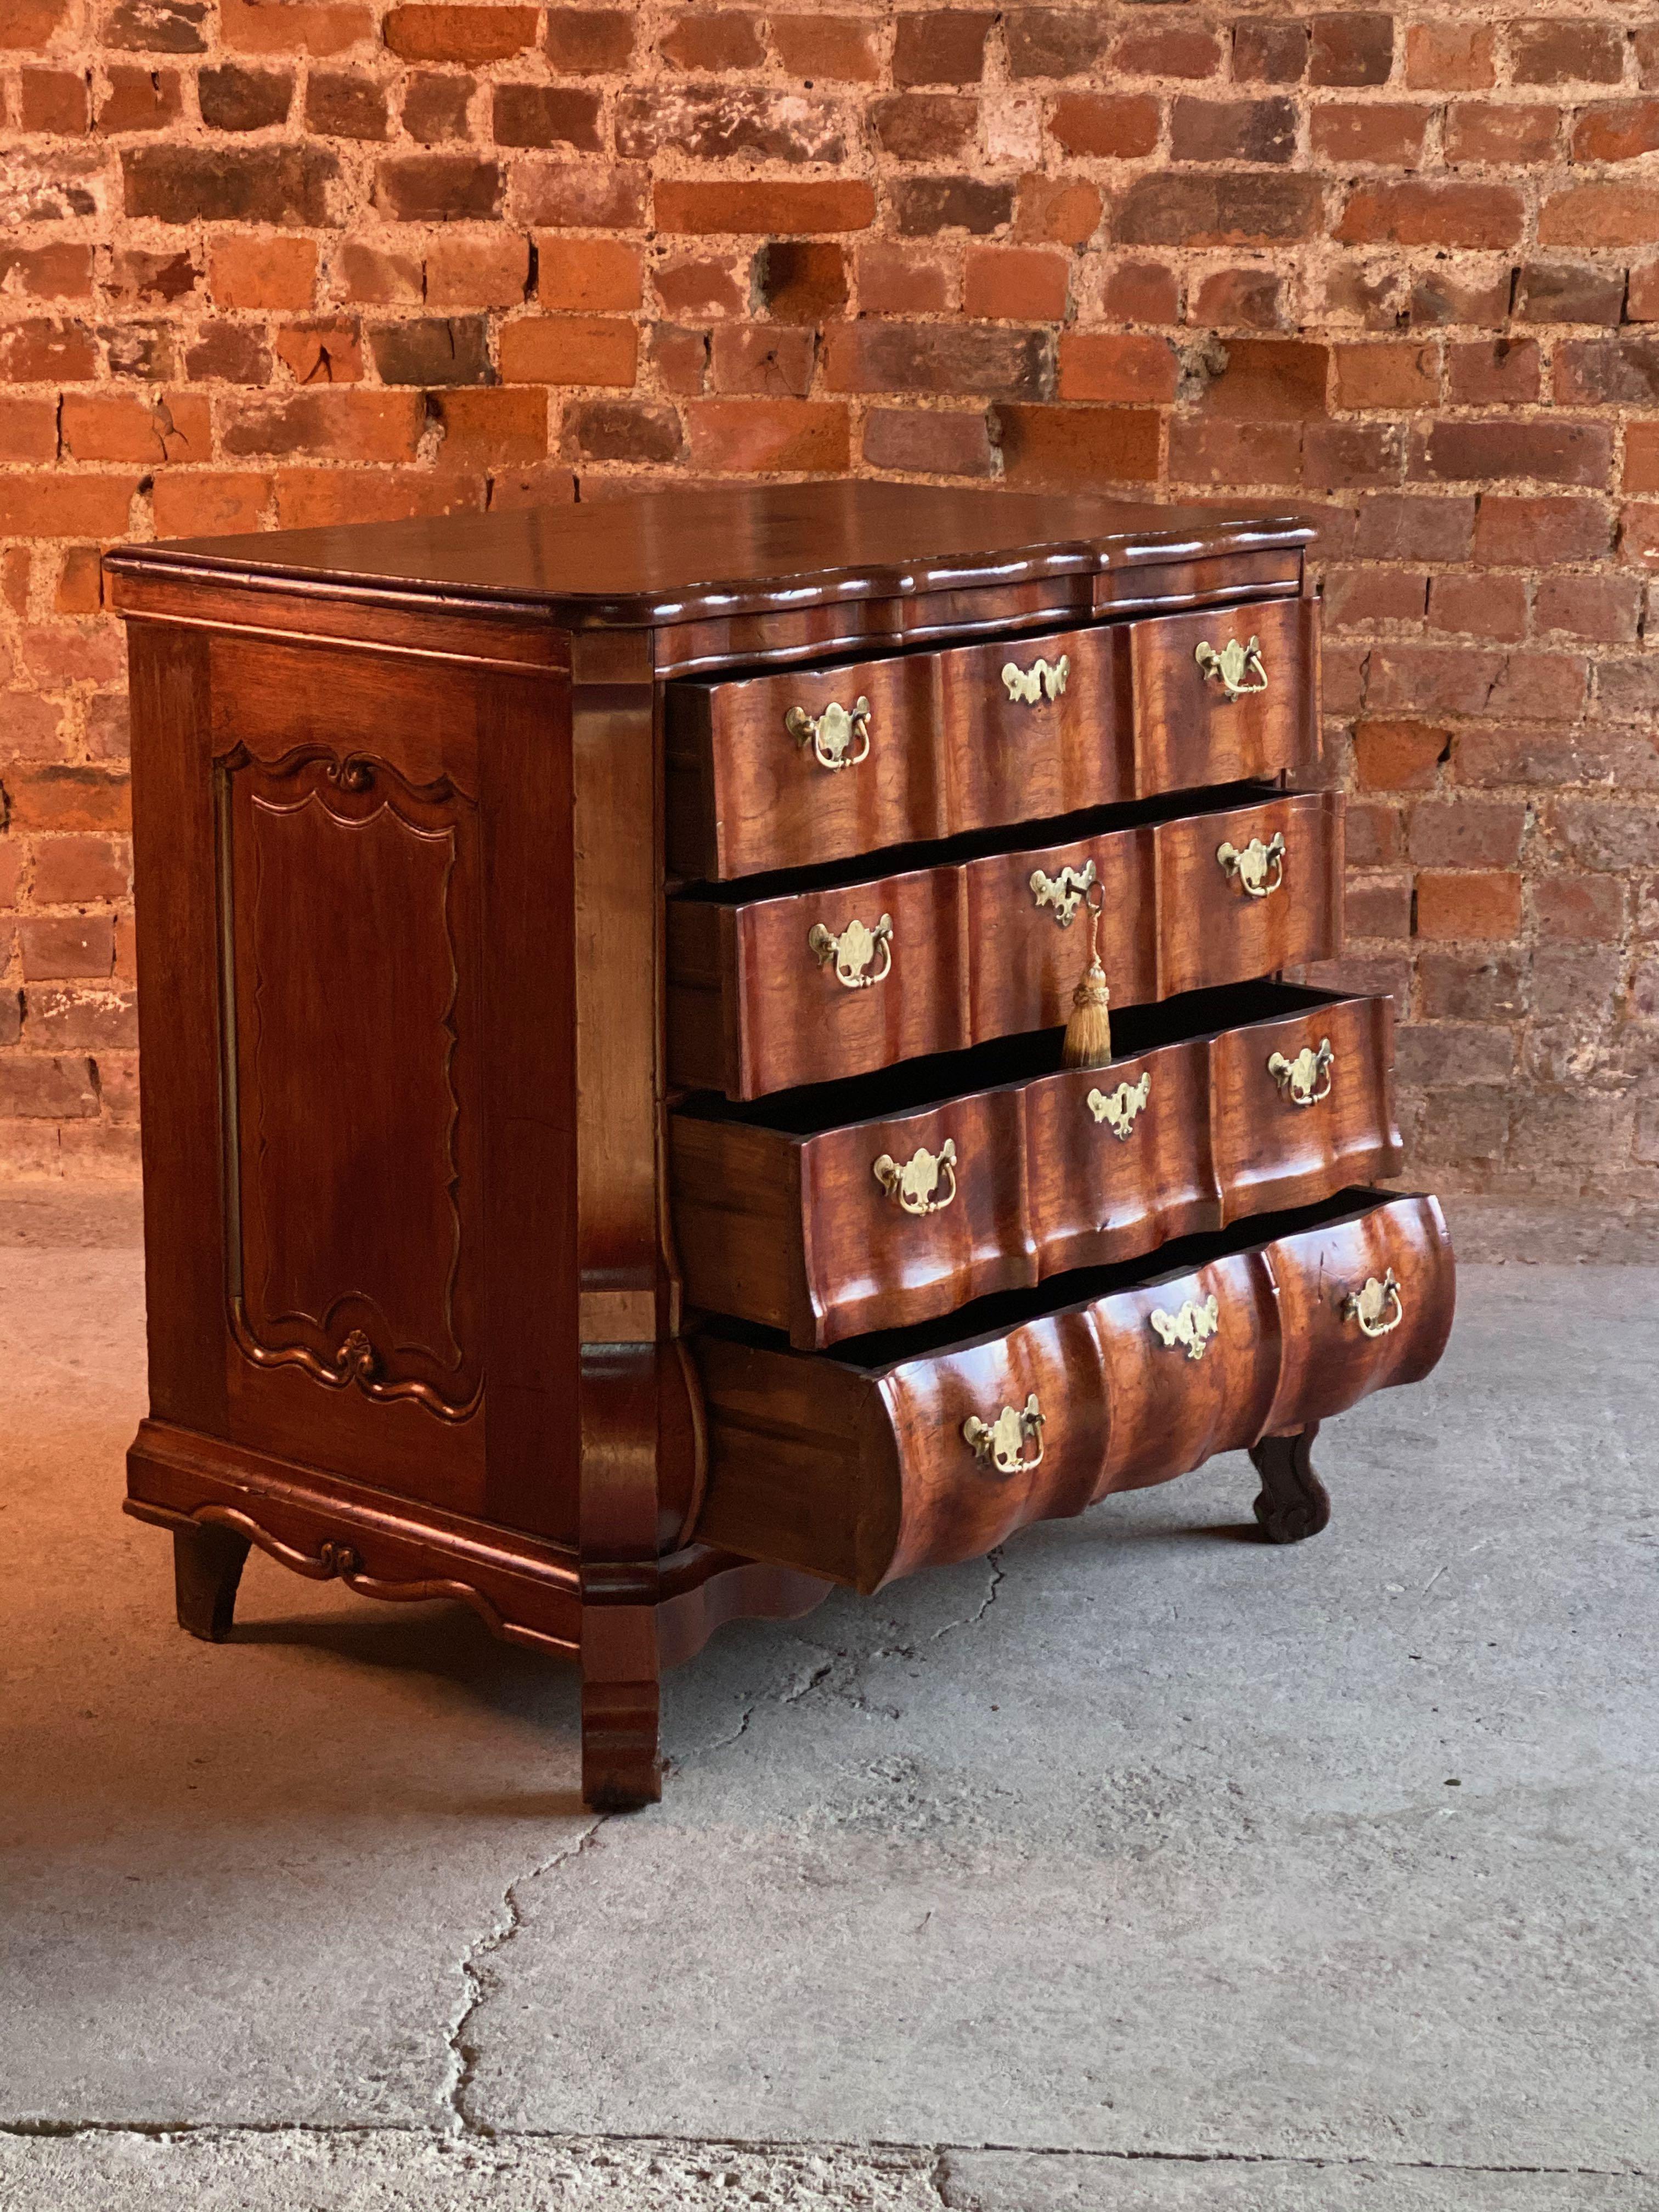 19th century Dutch rosewood bombe commode chest of drawers, circa 1820

We are delighted to offer this stunning early 19th century Dutch rosewood bombe commode chest of drawers, the scalloped shaped top over four graduated shaped drawers with